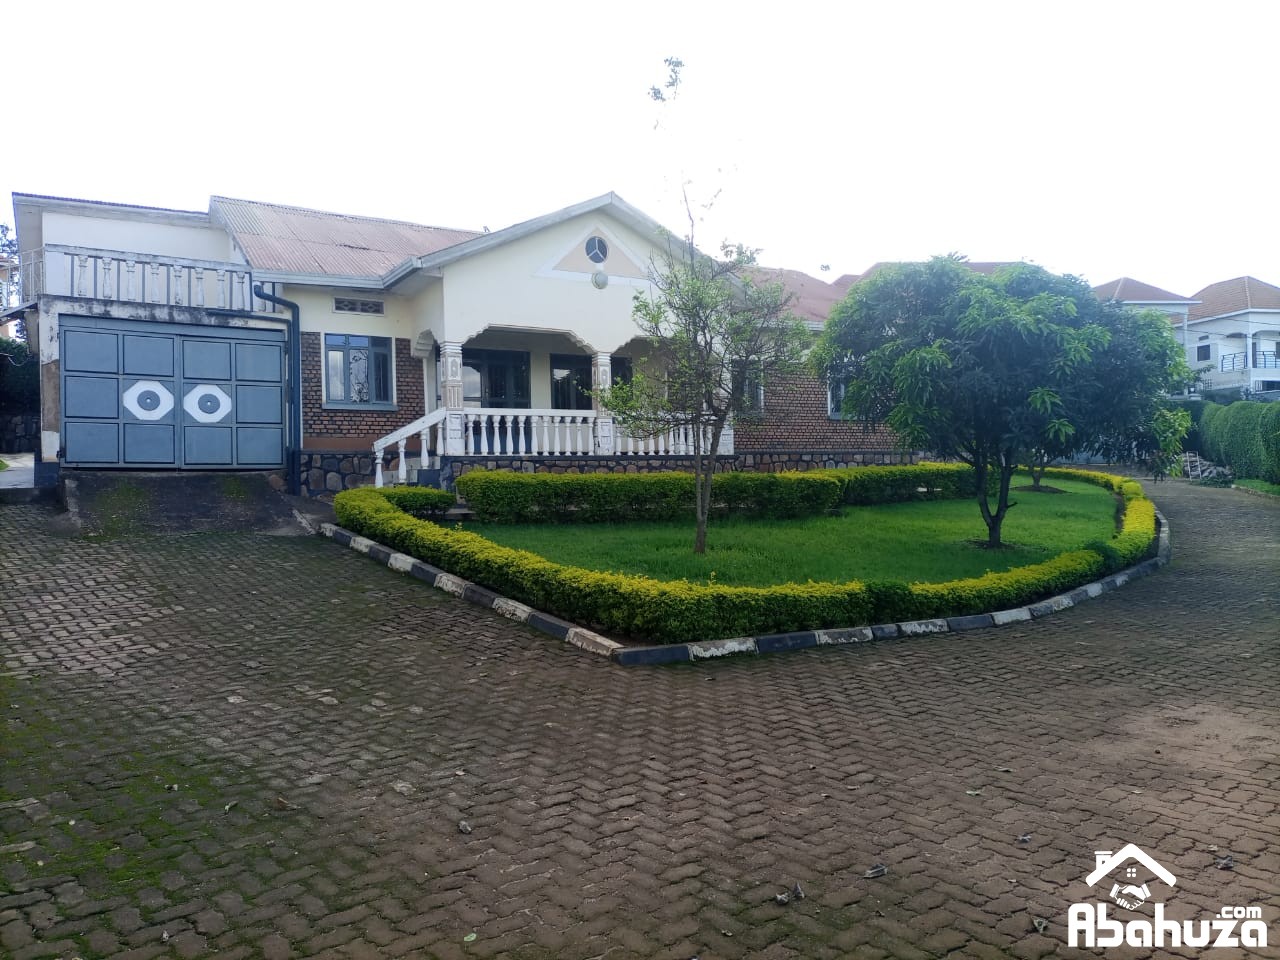 A 5 BEDROOM HOUSE FOR SALE IN KIGALI AT KICUKIRO